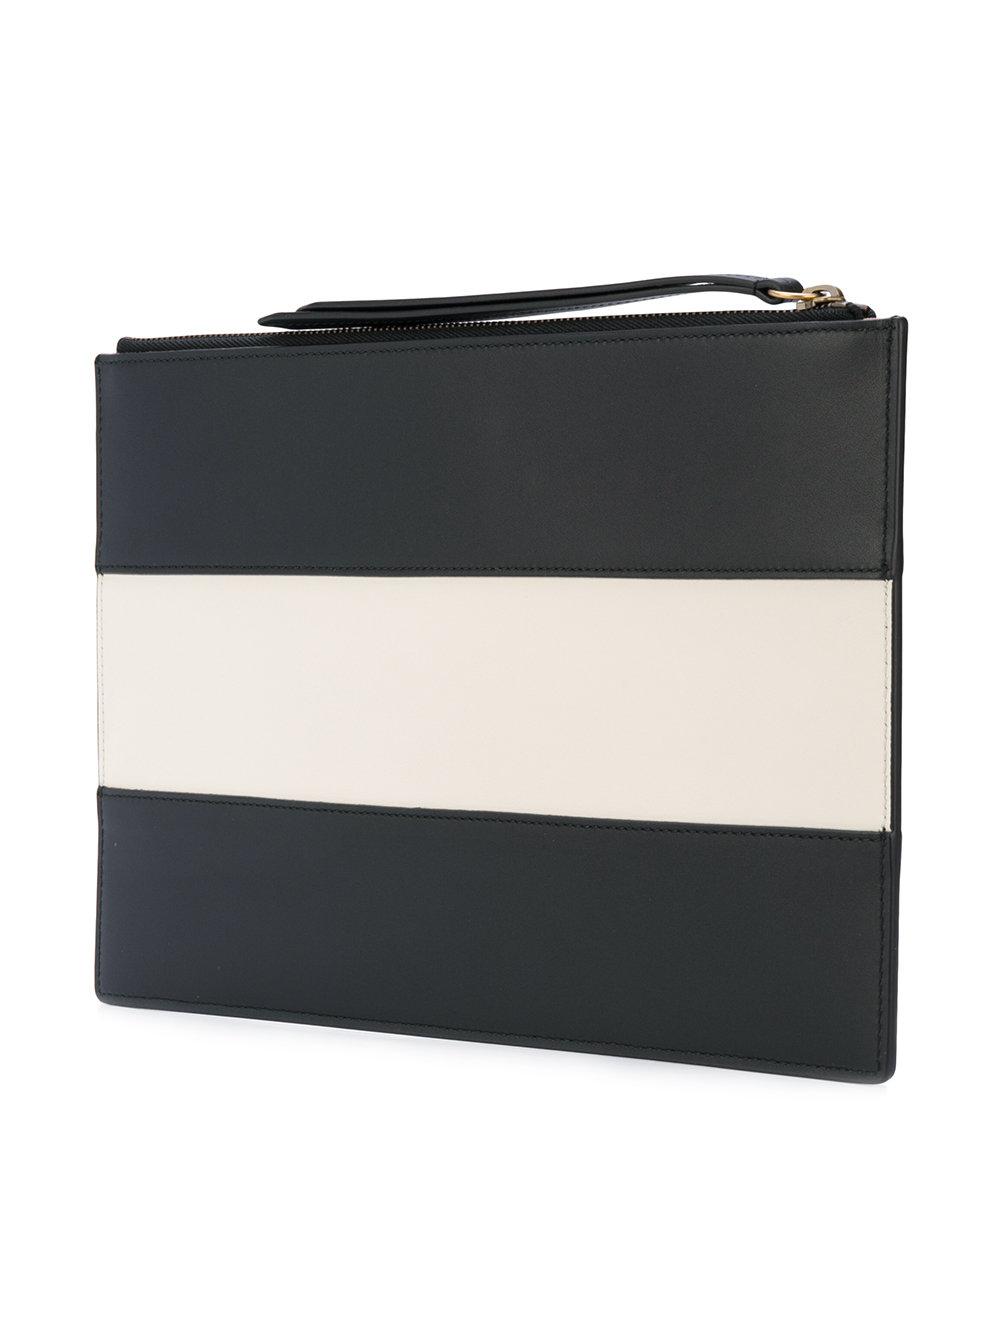 Gucci Leather Bee Clutch Bag in Black - Lyst